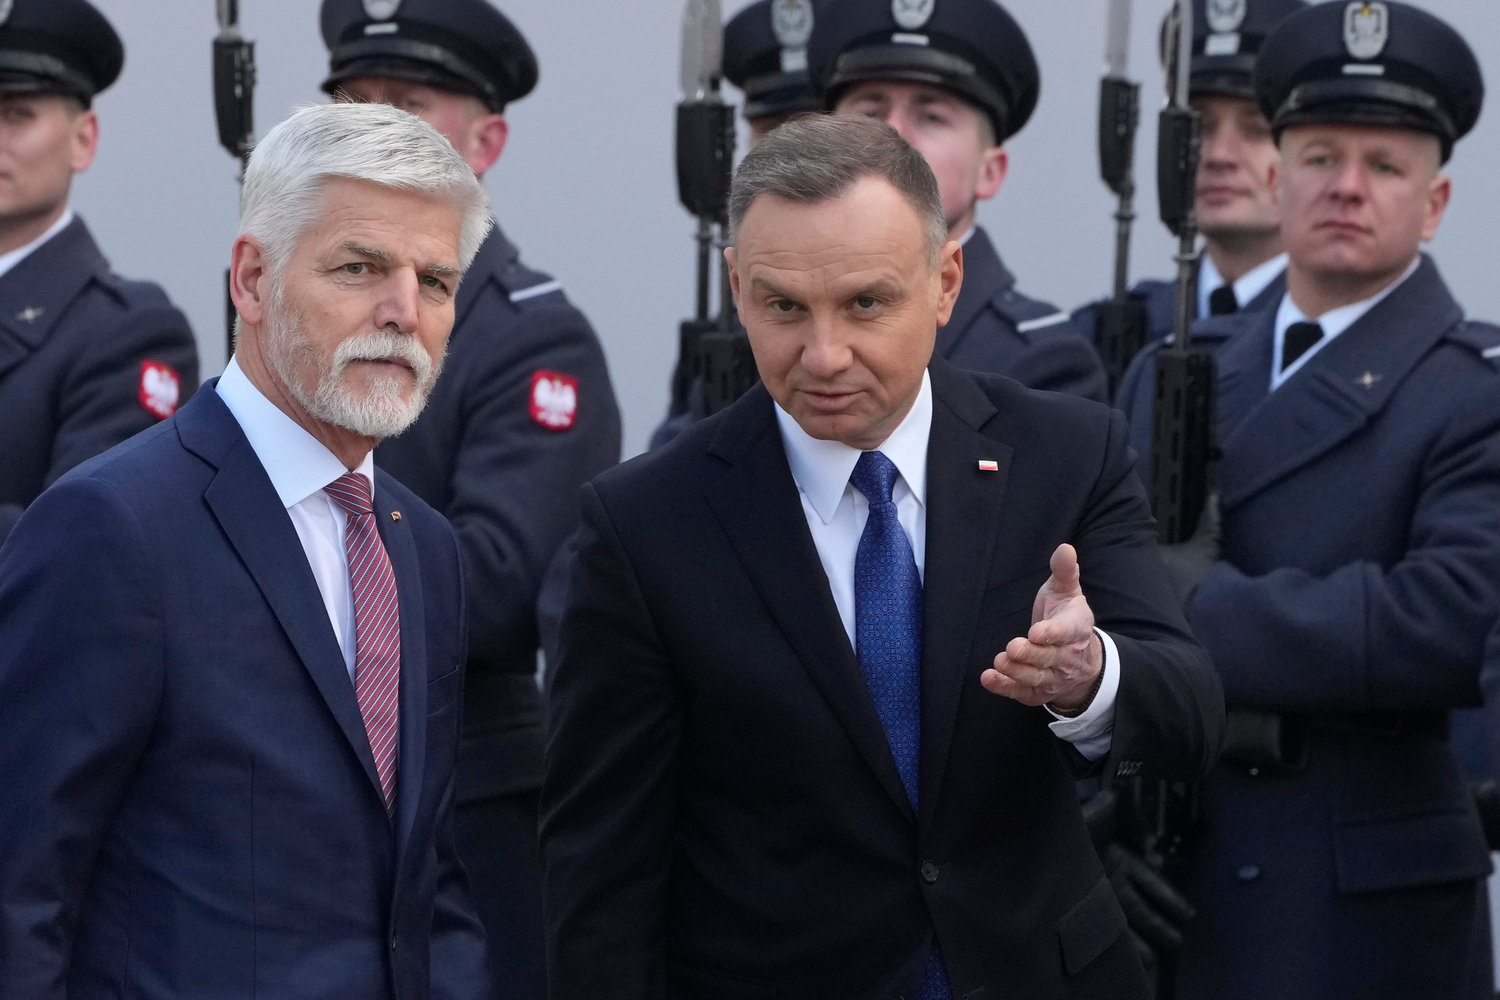 Poland's President Andrzej Duda, right, welcomes Czech Republic's President Petr Pavel as they meet at the Presidential Palace in Warsaw, Poland, Thursday, March 16, 2023.